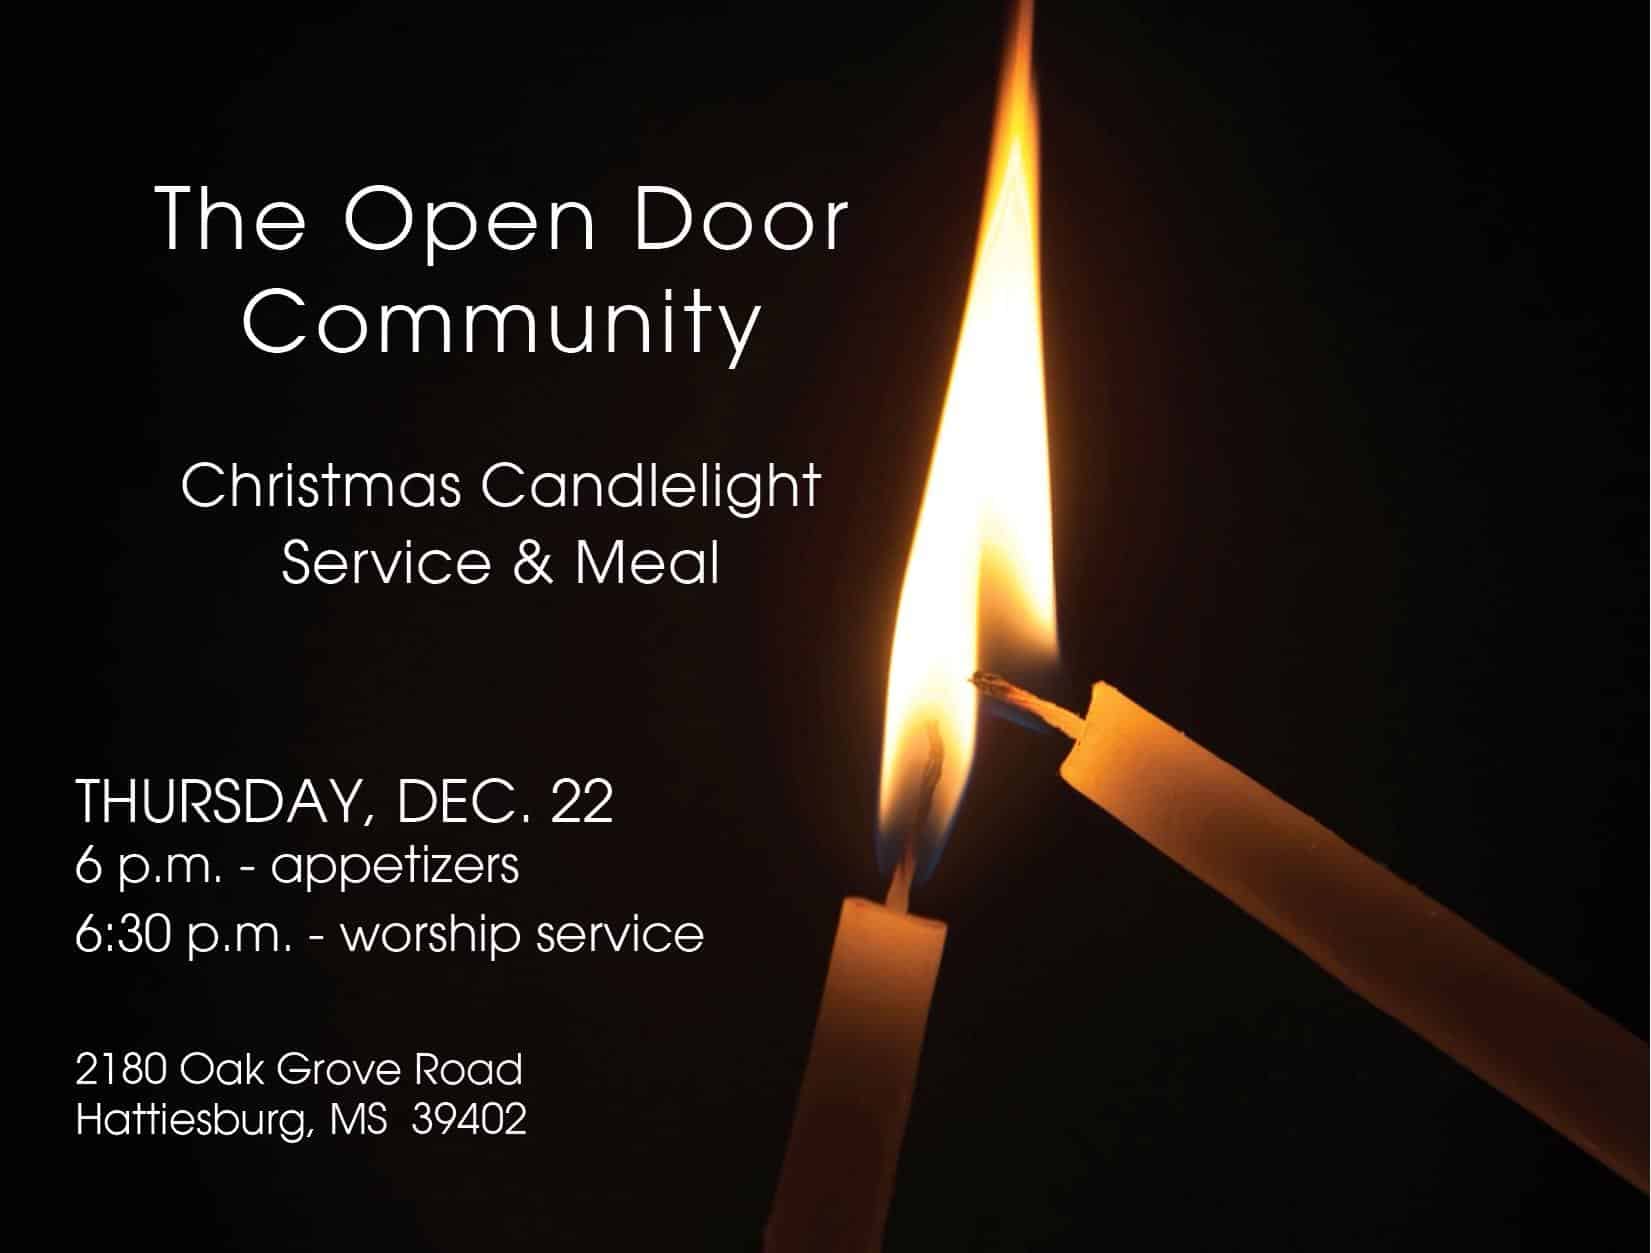 Christmas Candlelight Service & Meal